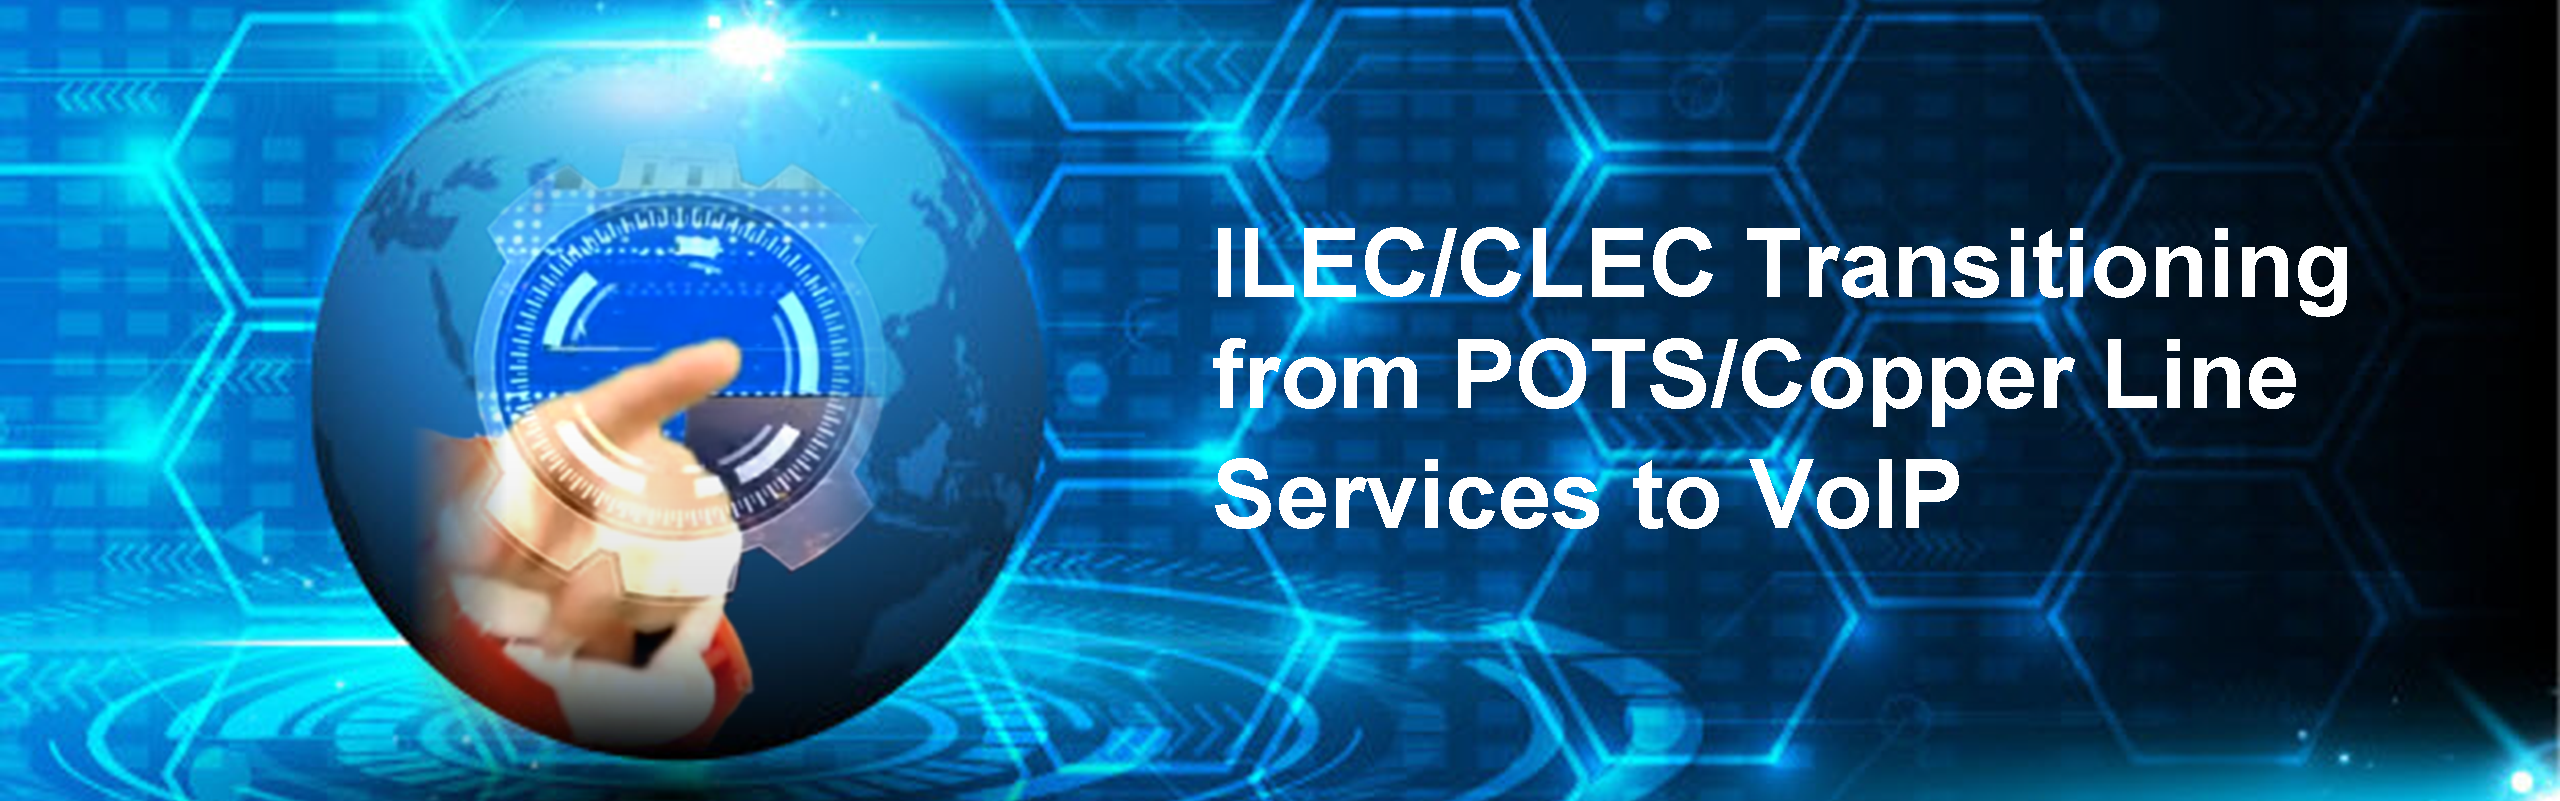 ILEC/CLEC Transitioning from POTS/Copper Line Services to VoIP